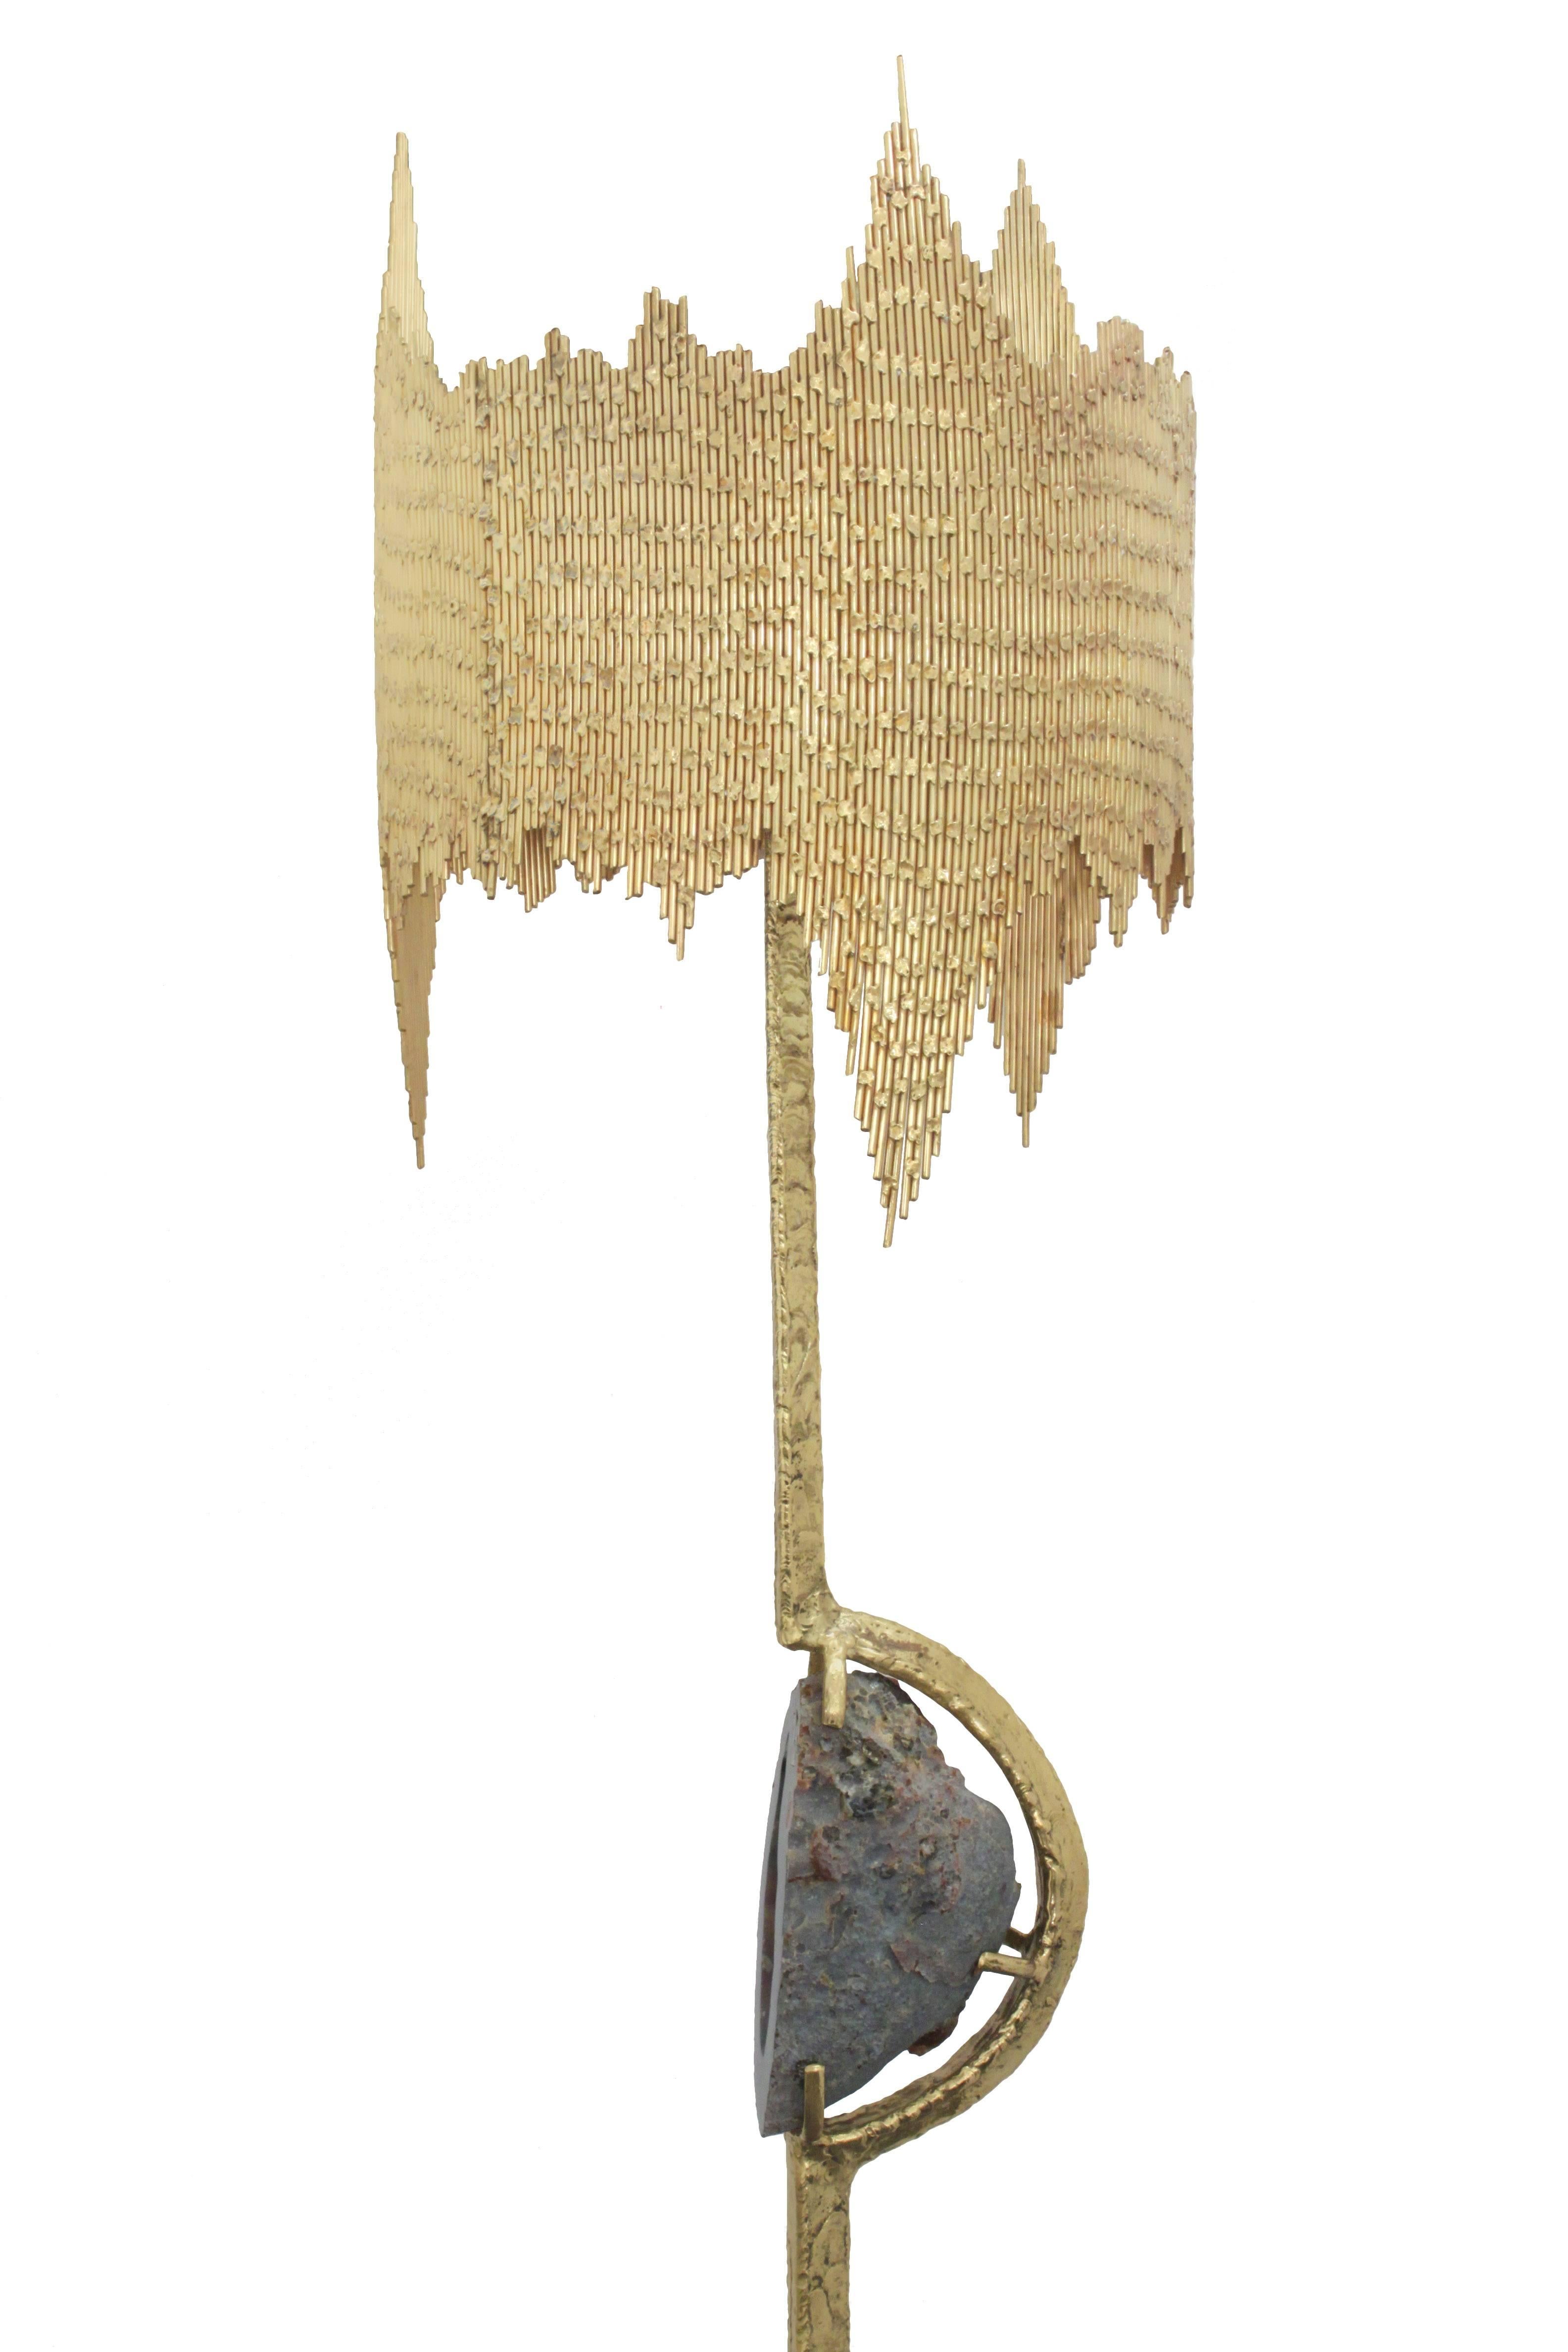 Unique and exceptional lamp in hand-welded brass with mounted agate and perforated welded shade by Jacques Duval-Brasseur, France 1970's (signed “JD Brasseur” on leg and signed “JD Brasseur” in the middle near agate).  Jacques Duval-Brasseur was a